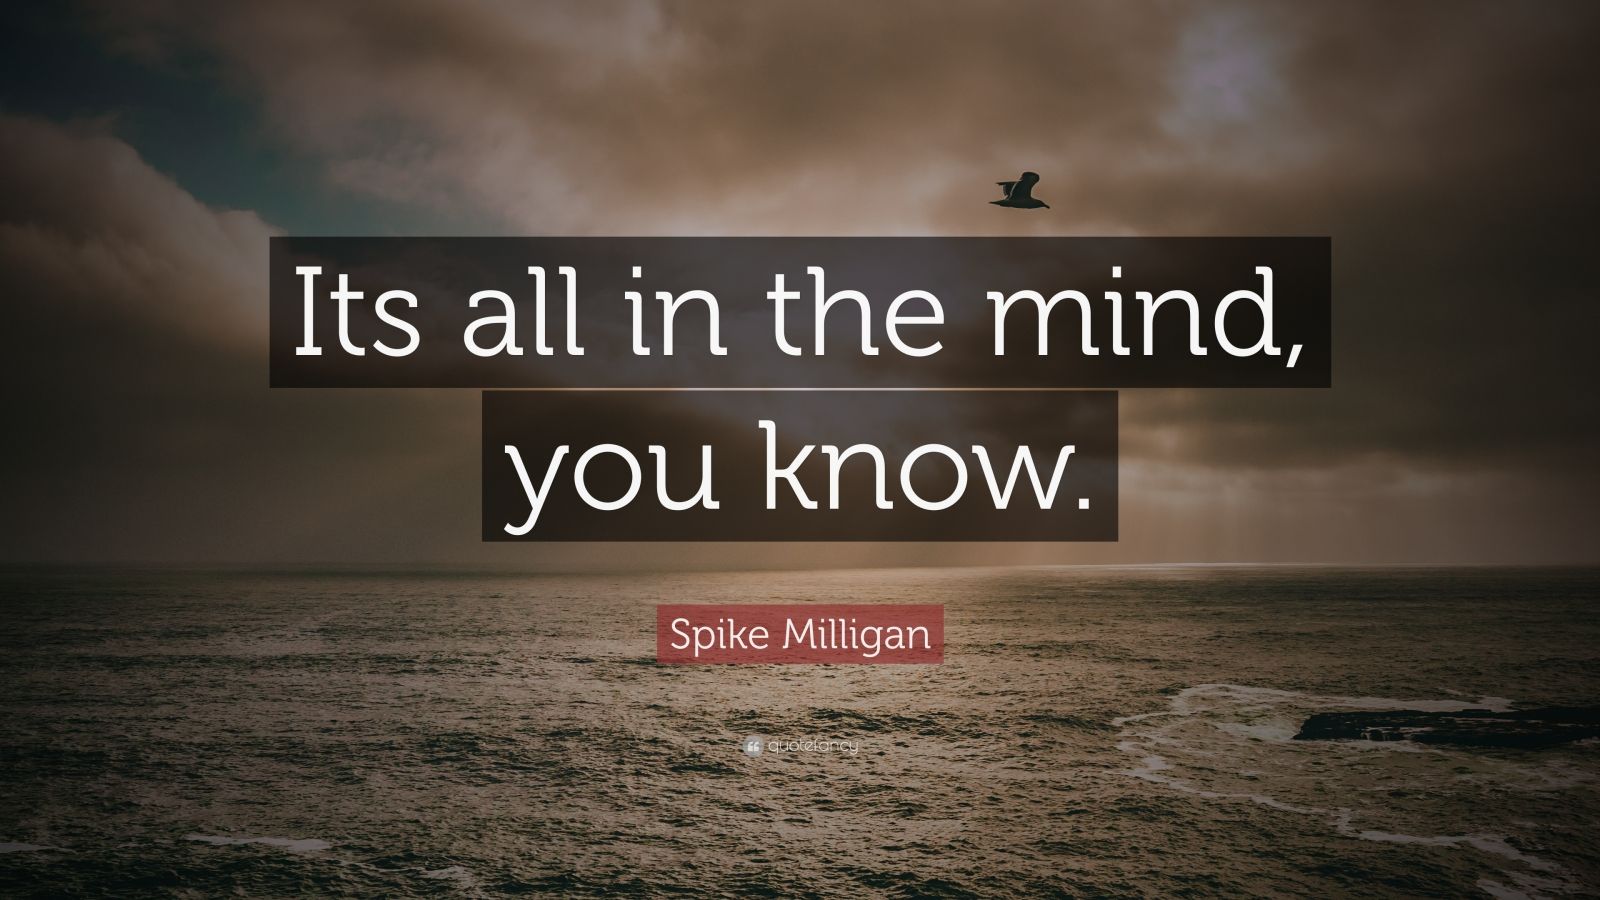 Spike Milligan Quote: “Its all in the mind, you know.”